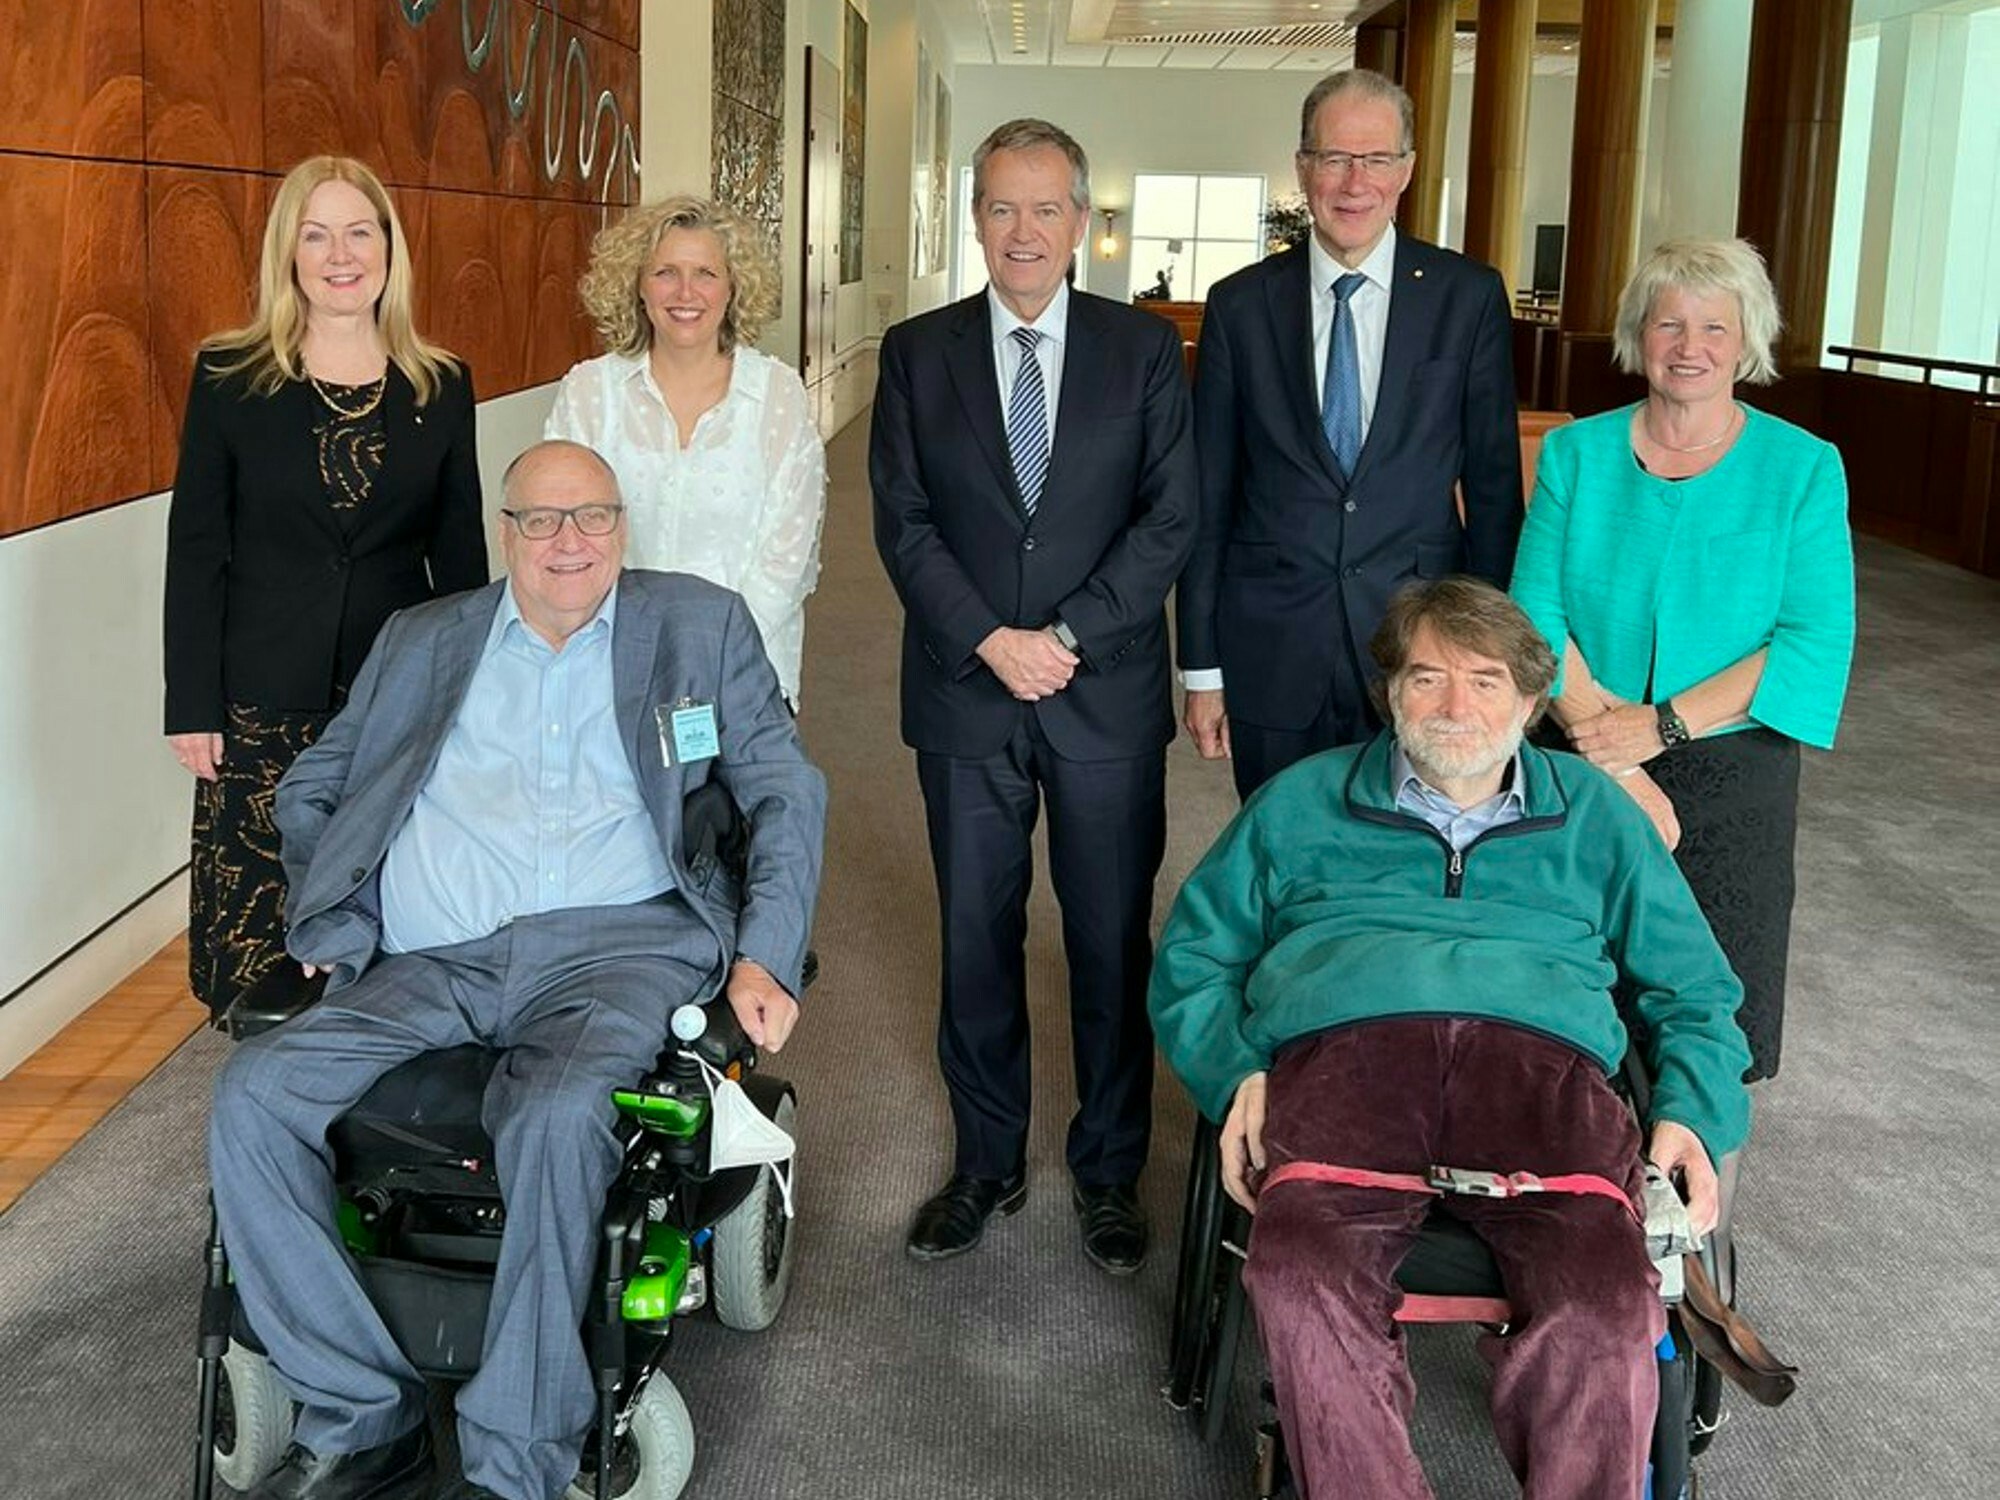 Minister Bill Shorten named Professor Bruce Bonyhady AM and Ms Lisa Paul AO PSM as co-chairs of the NDIS review panel in 2022. [Source: Twitter]
